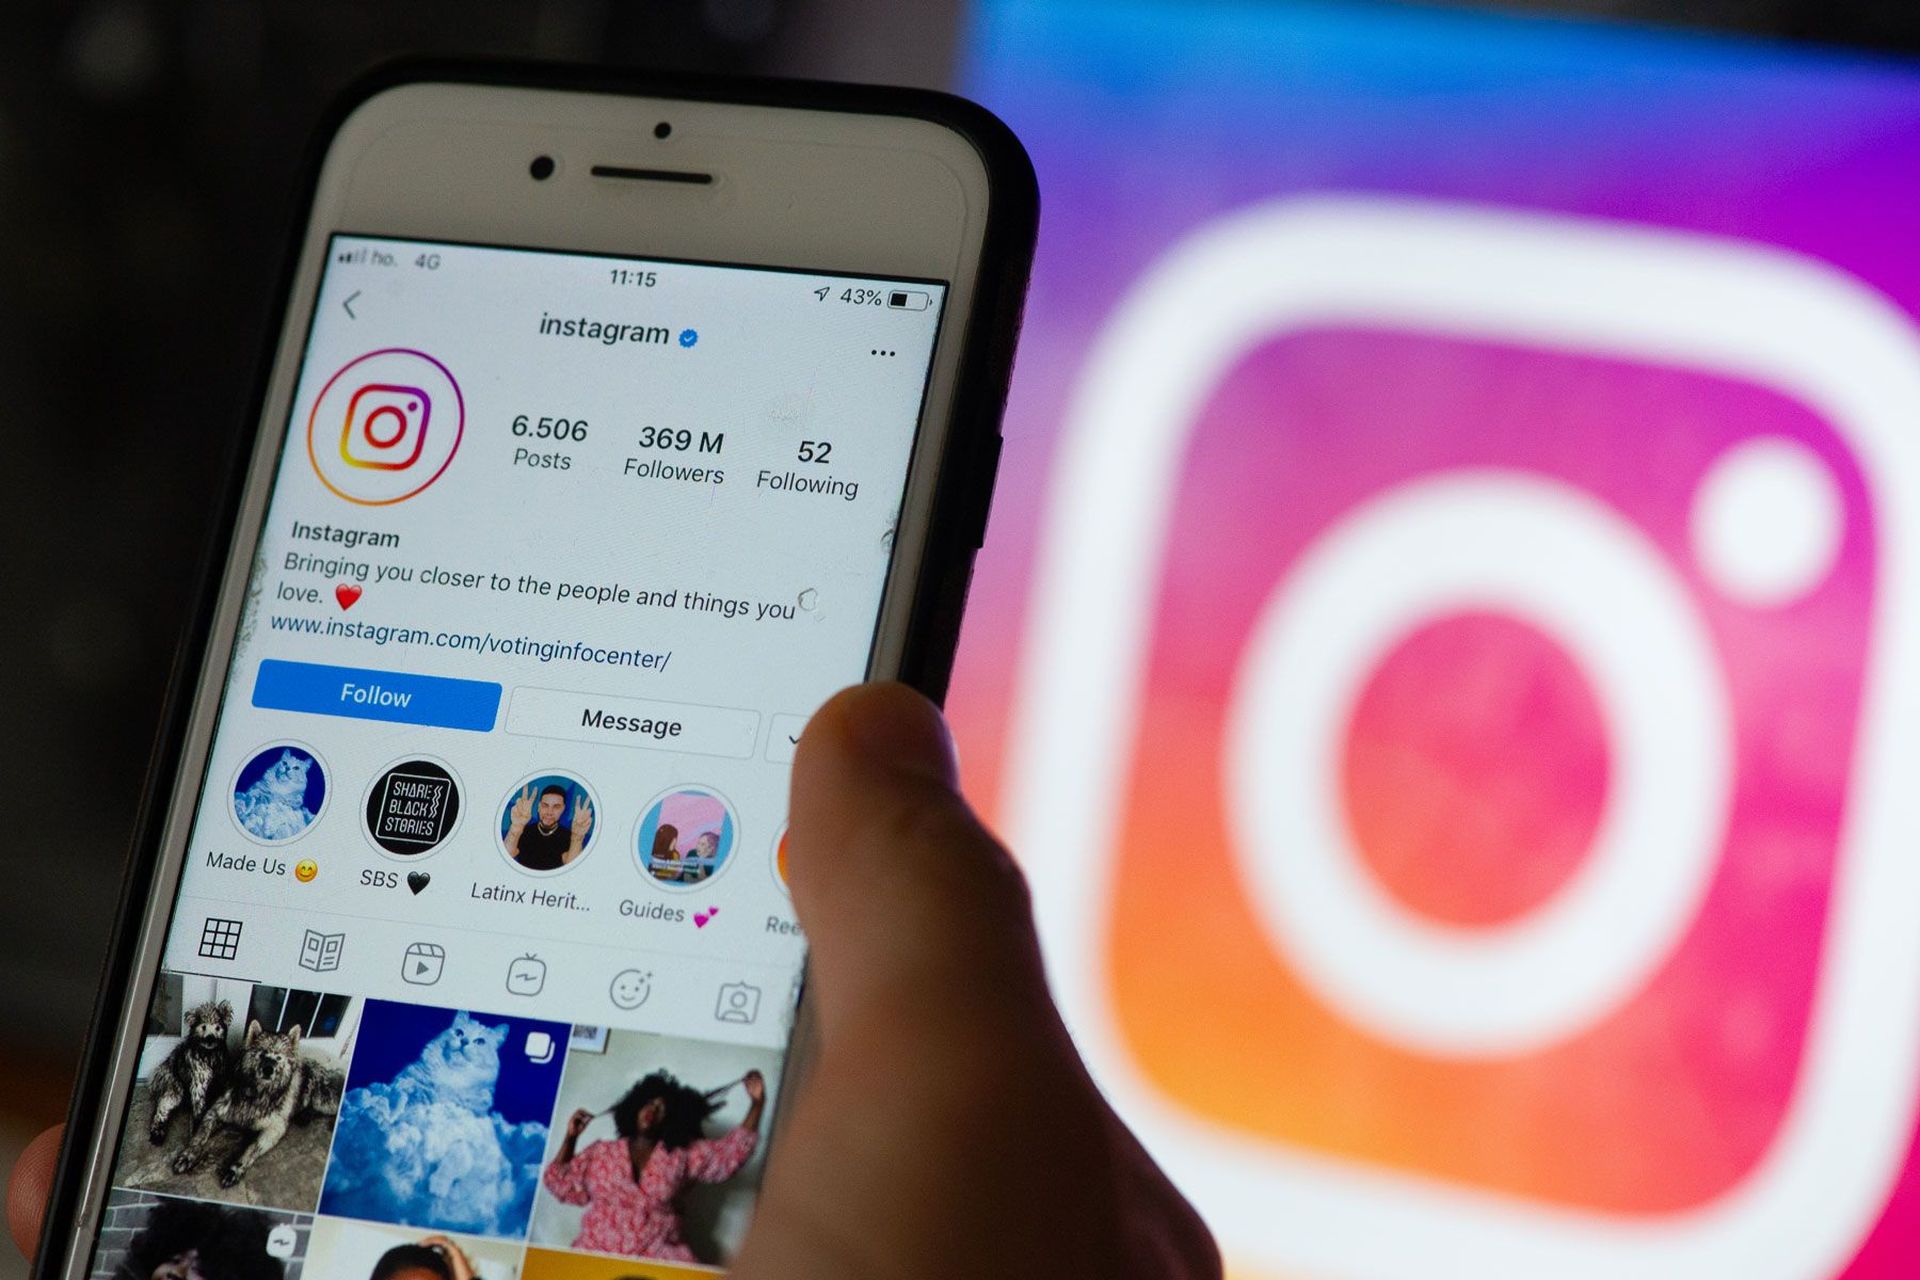 Instagram skipping stories glitch: How to the fix Instagram stories too fast issue?